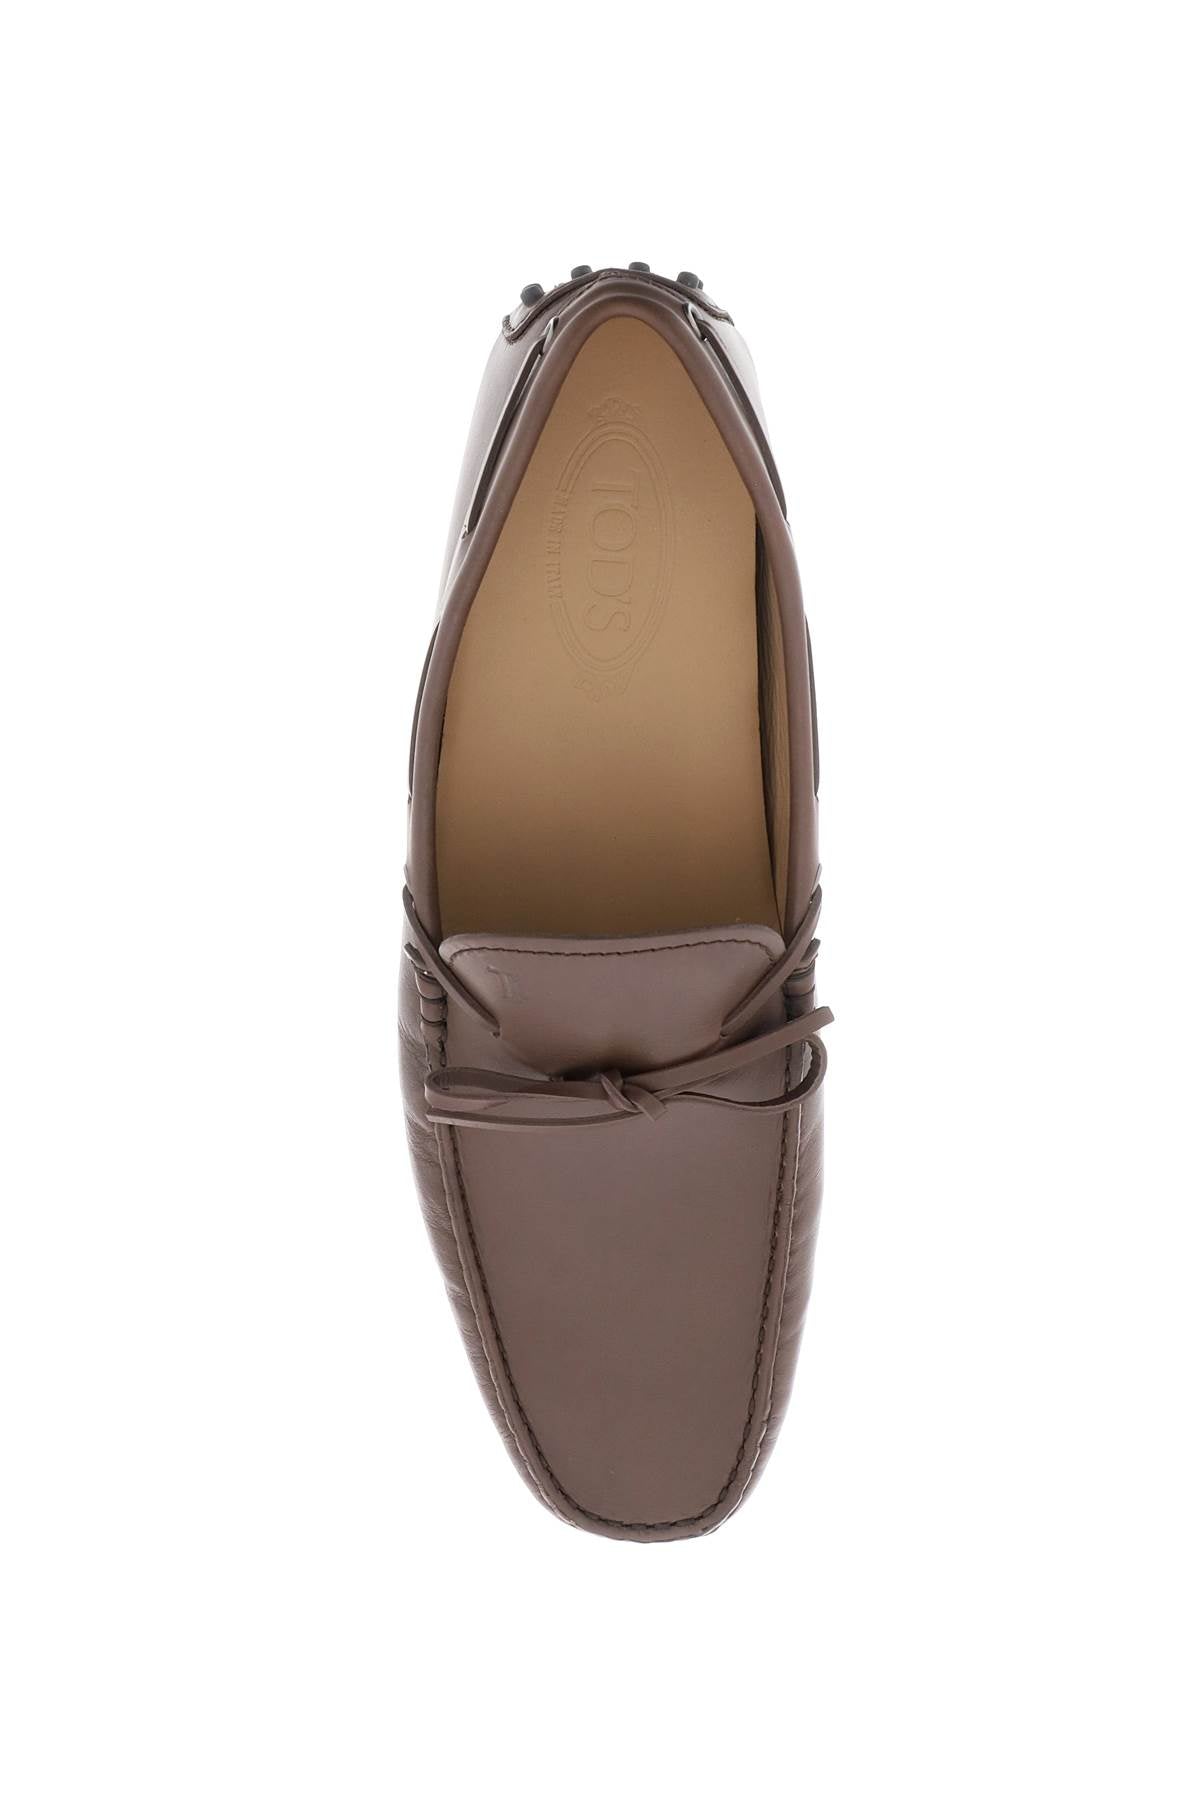 Tod'S 'City Gommino' Loafers-Tod'S-Urbanheer